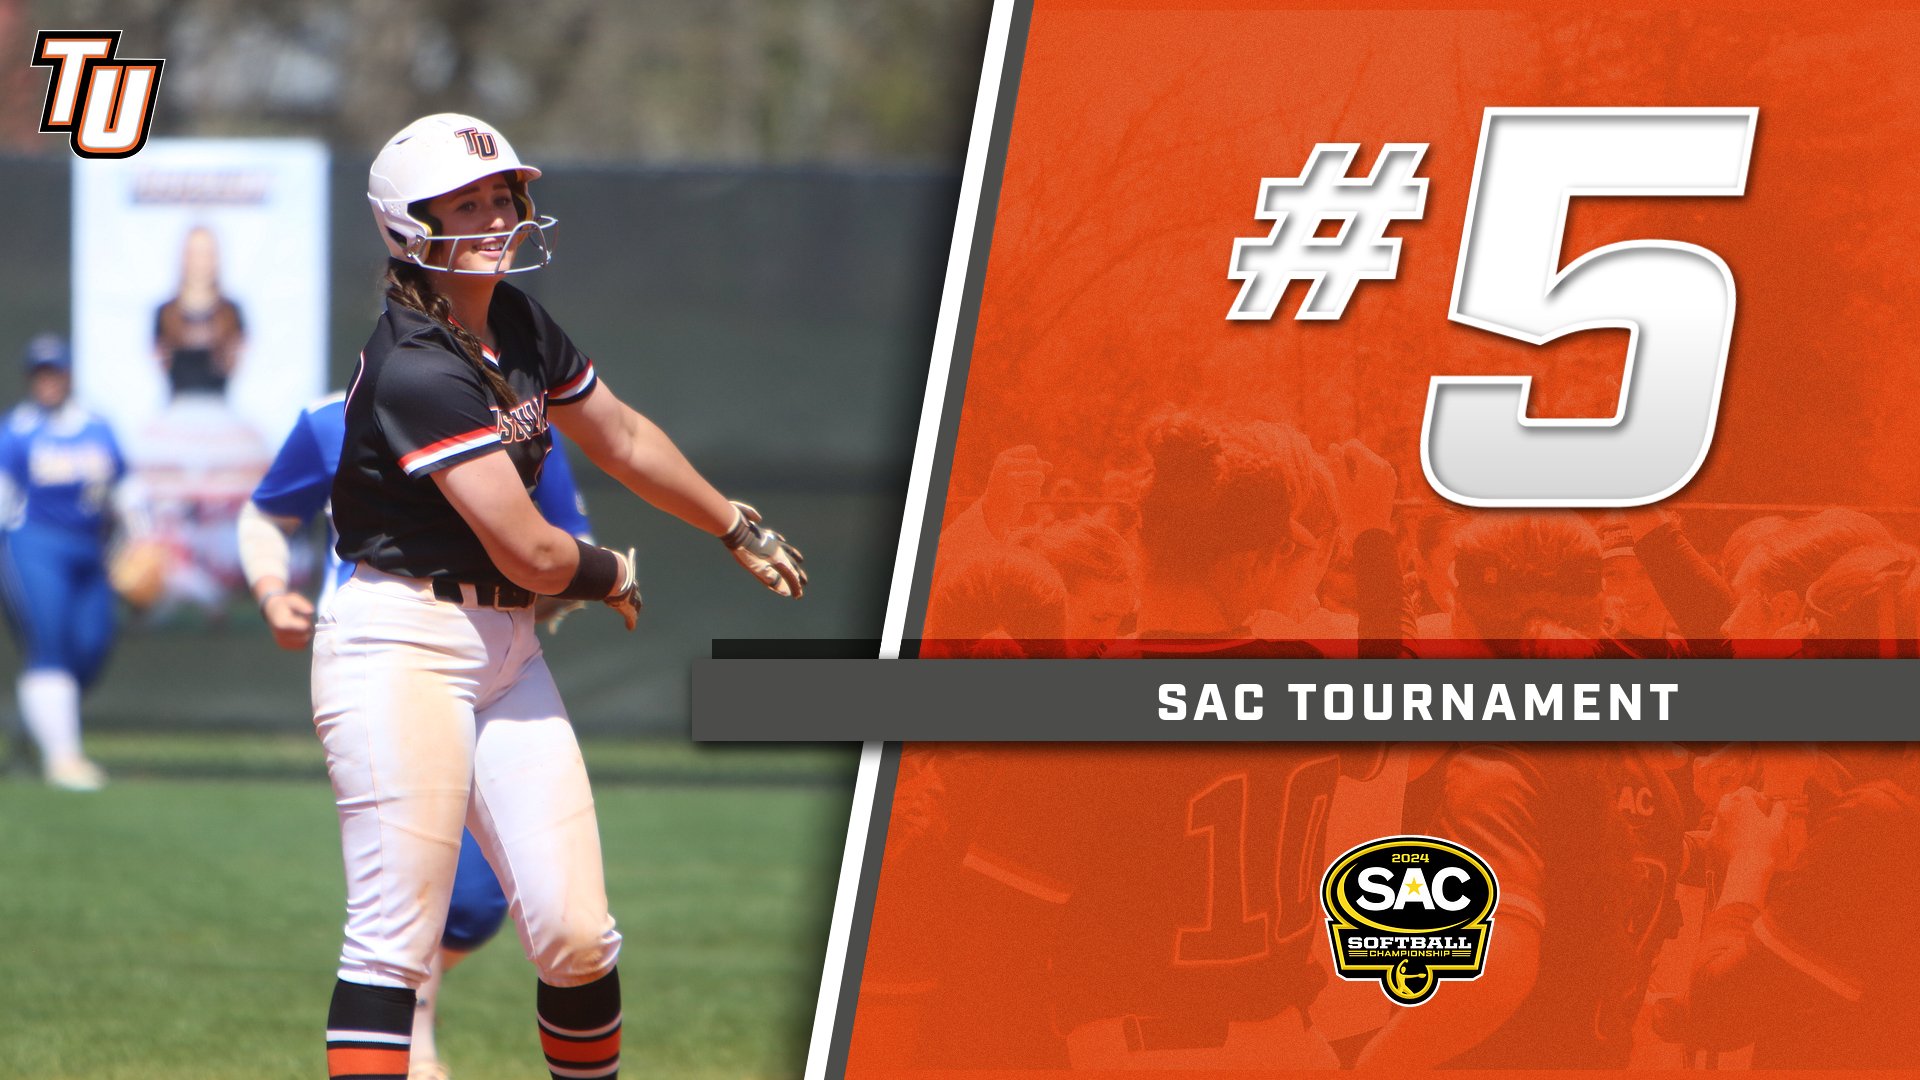 Tusculum seeded fifth, face LR in SAC opening round